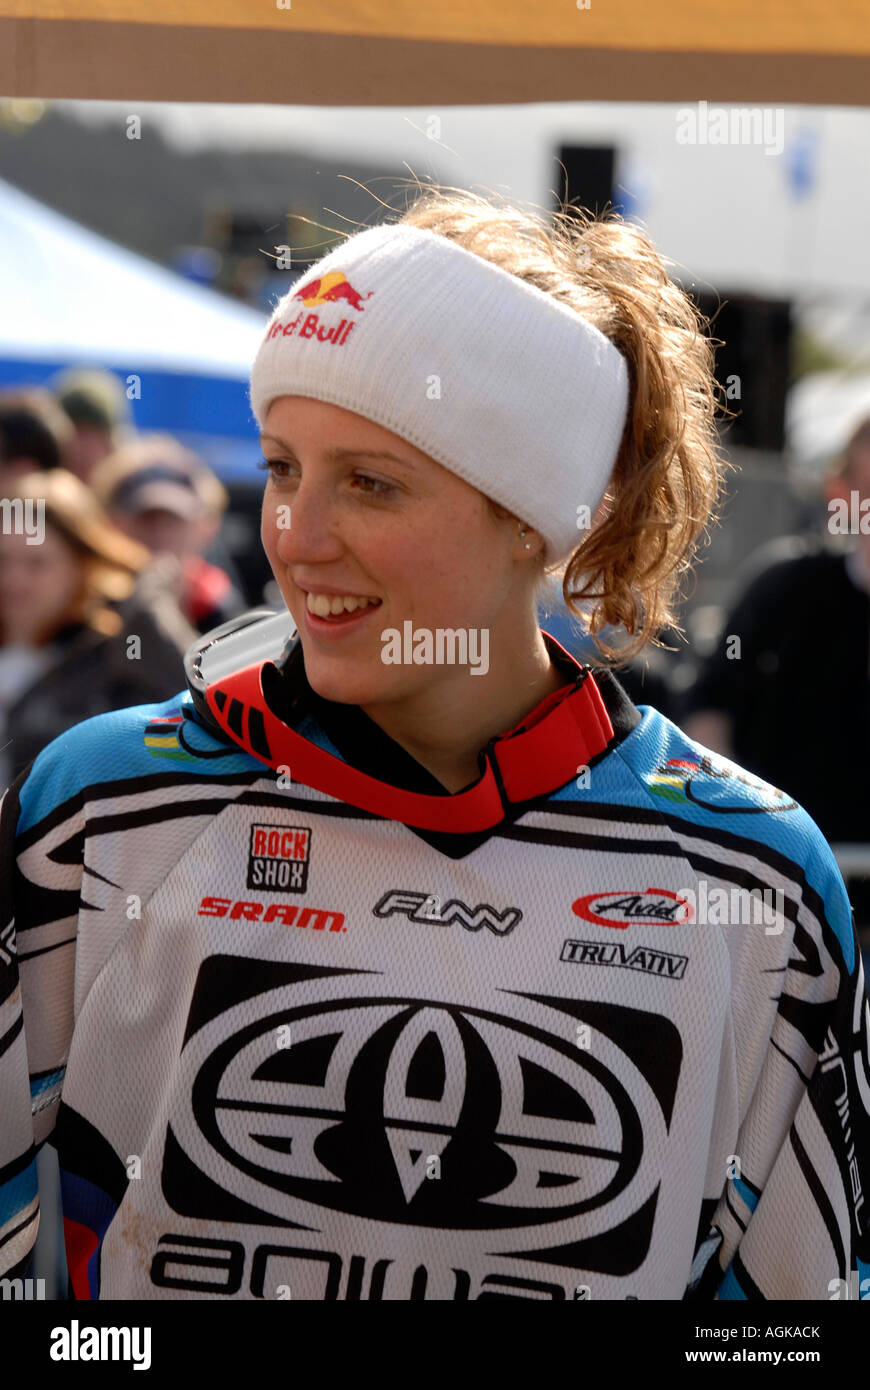 Britain s Rachel Atherton will be gunning for this year s World Champion title in Fort William Scotland Stock Photo